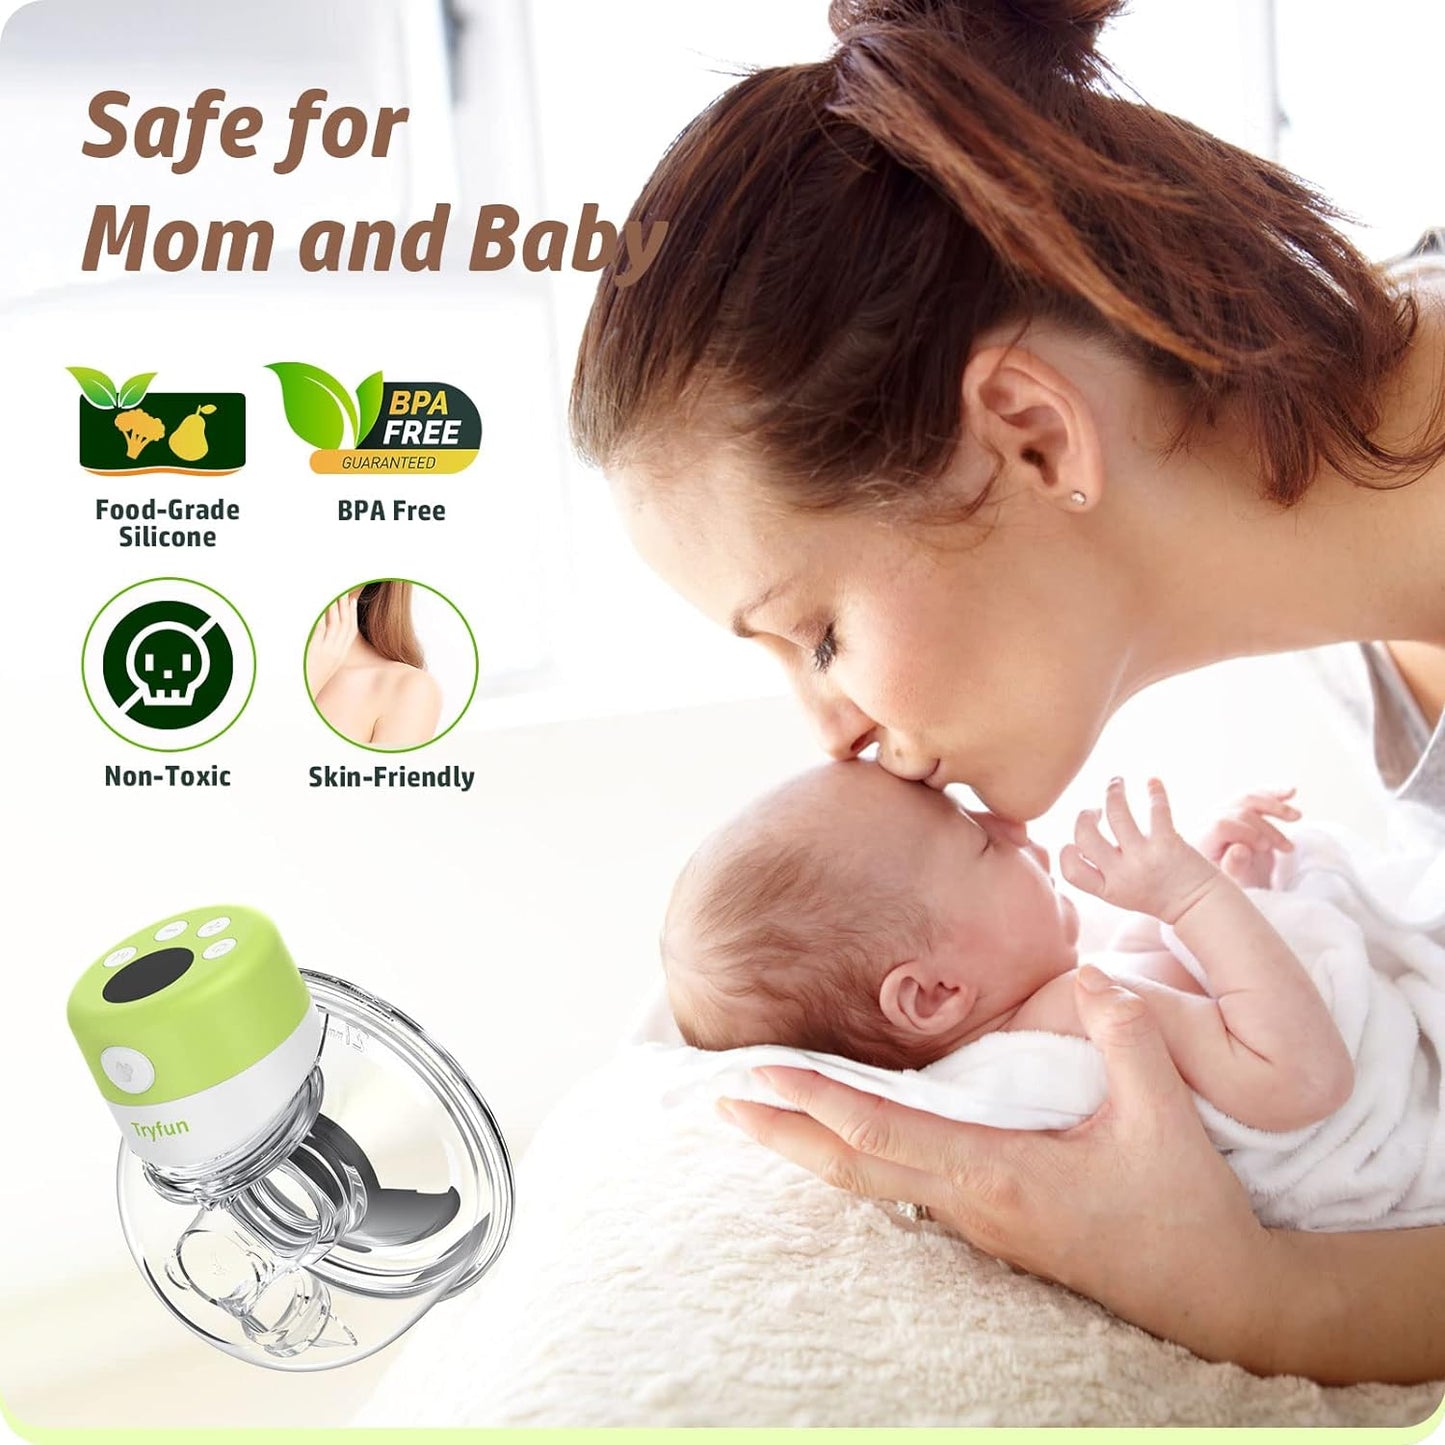 Tryfun Wearable Breast Pump, Electric Breastfeeding Pump with 2 Suction Modes & 9 Levels, Fast Pumping/Easy to Use & Wash/LCD Display/Low Noise Portable Breast Pumping, Wireless Hands Free Breast Pump